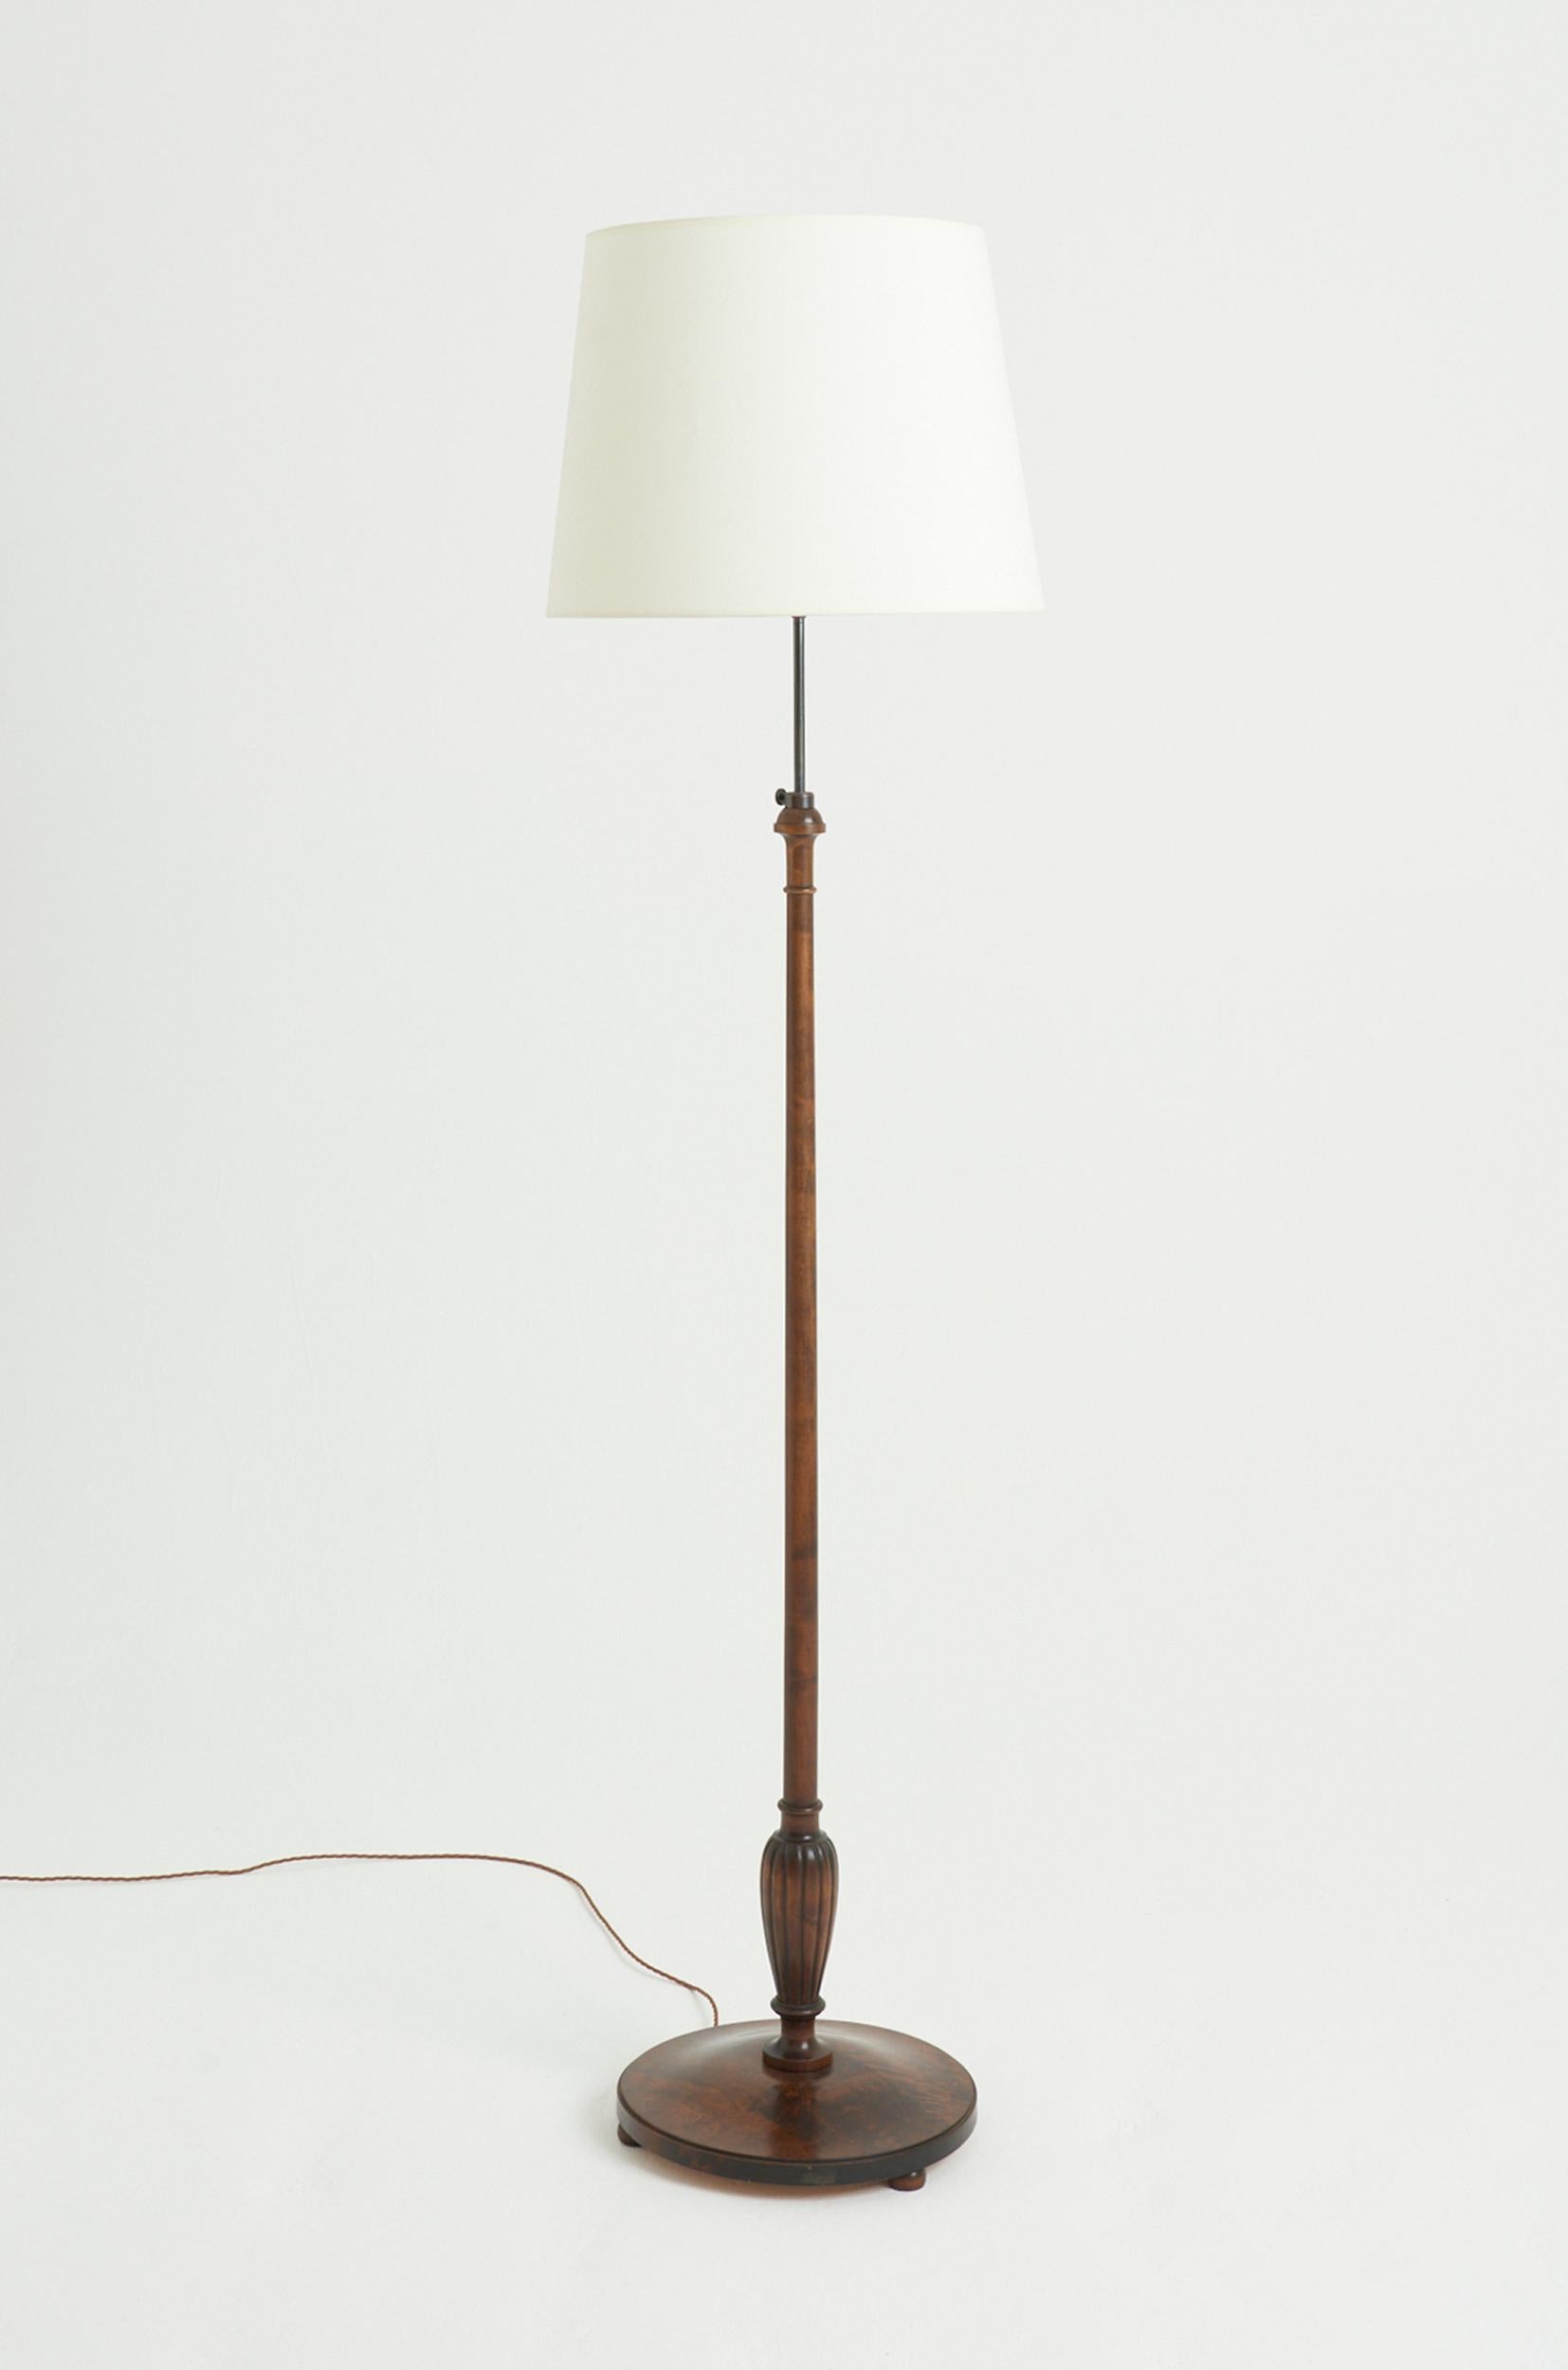 An Art Deco birch floor lamp
Sweden, Circa 1920
With the shade: 208 cm high by 51 cm diameter 
Lamp base only: 170 cm high by 39 cm diameter